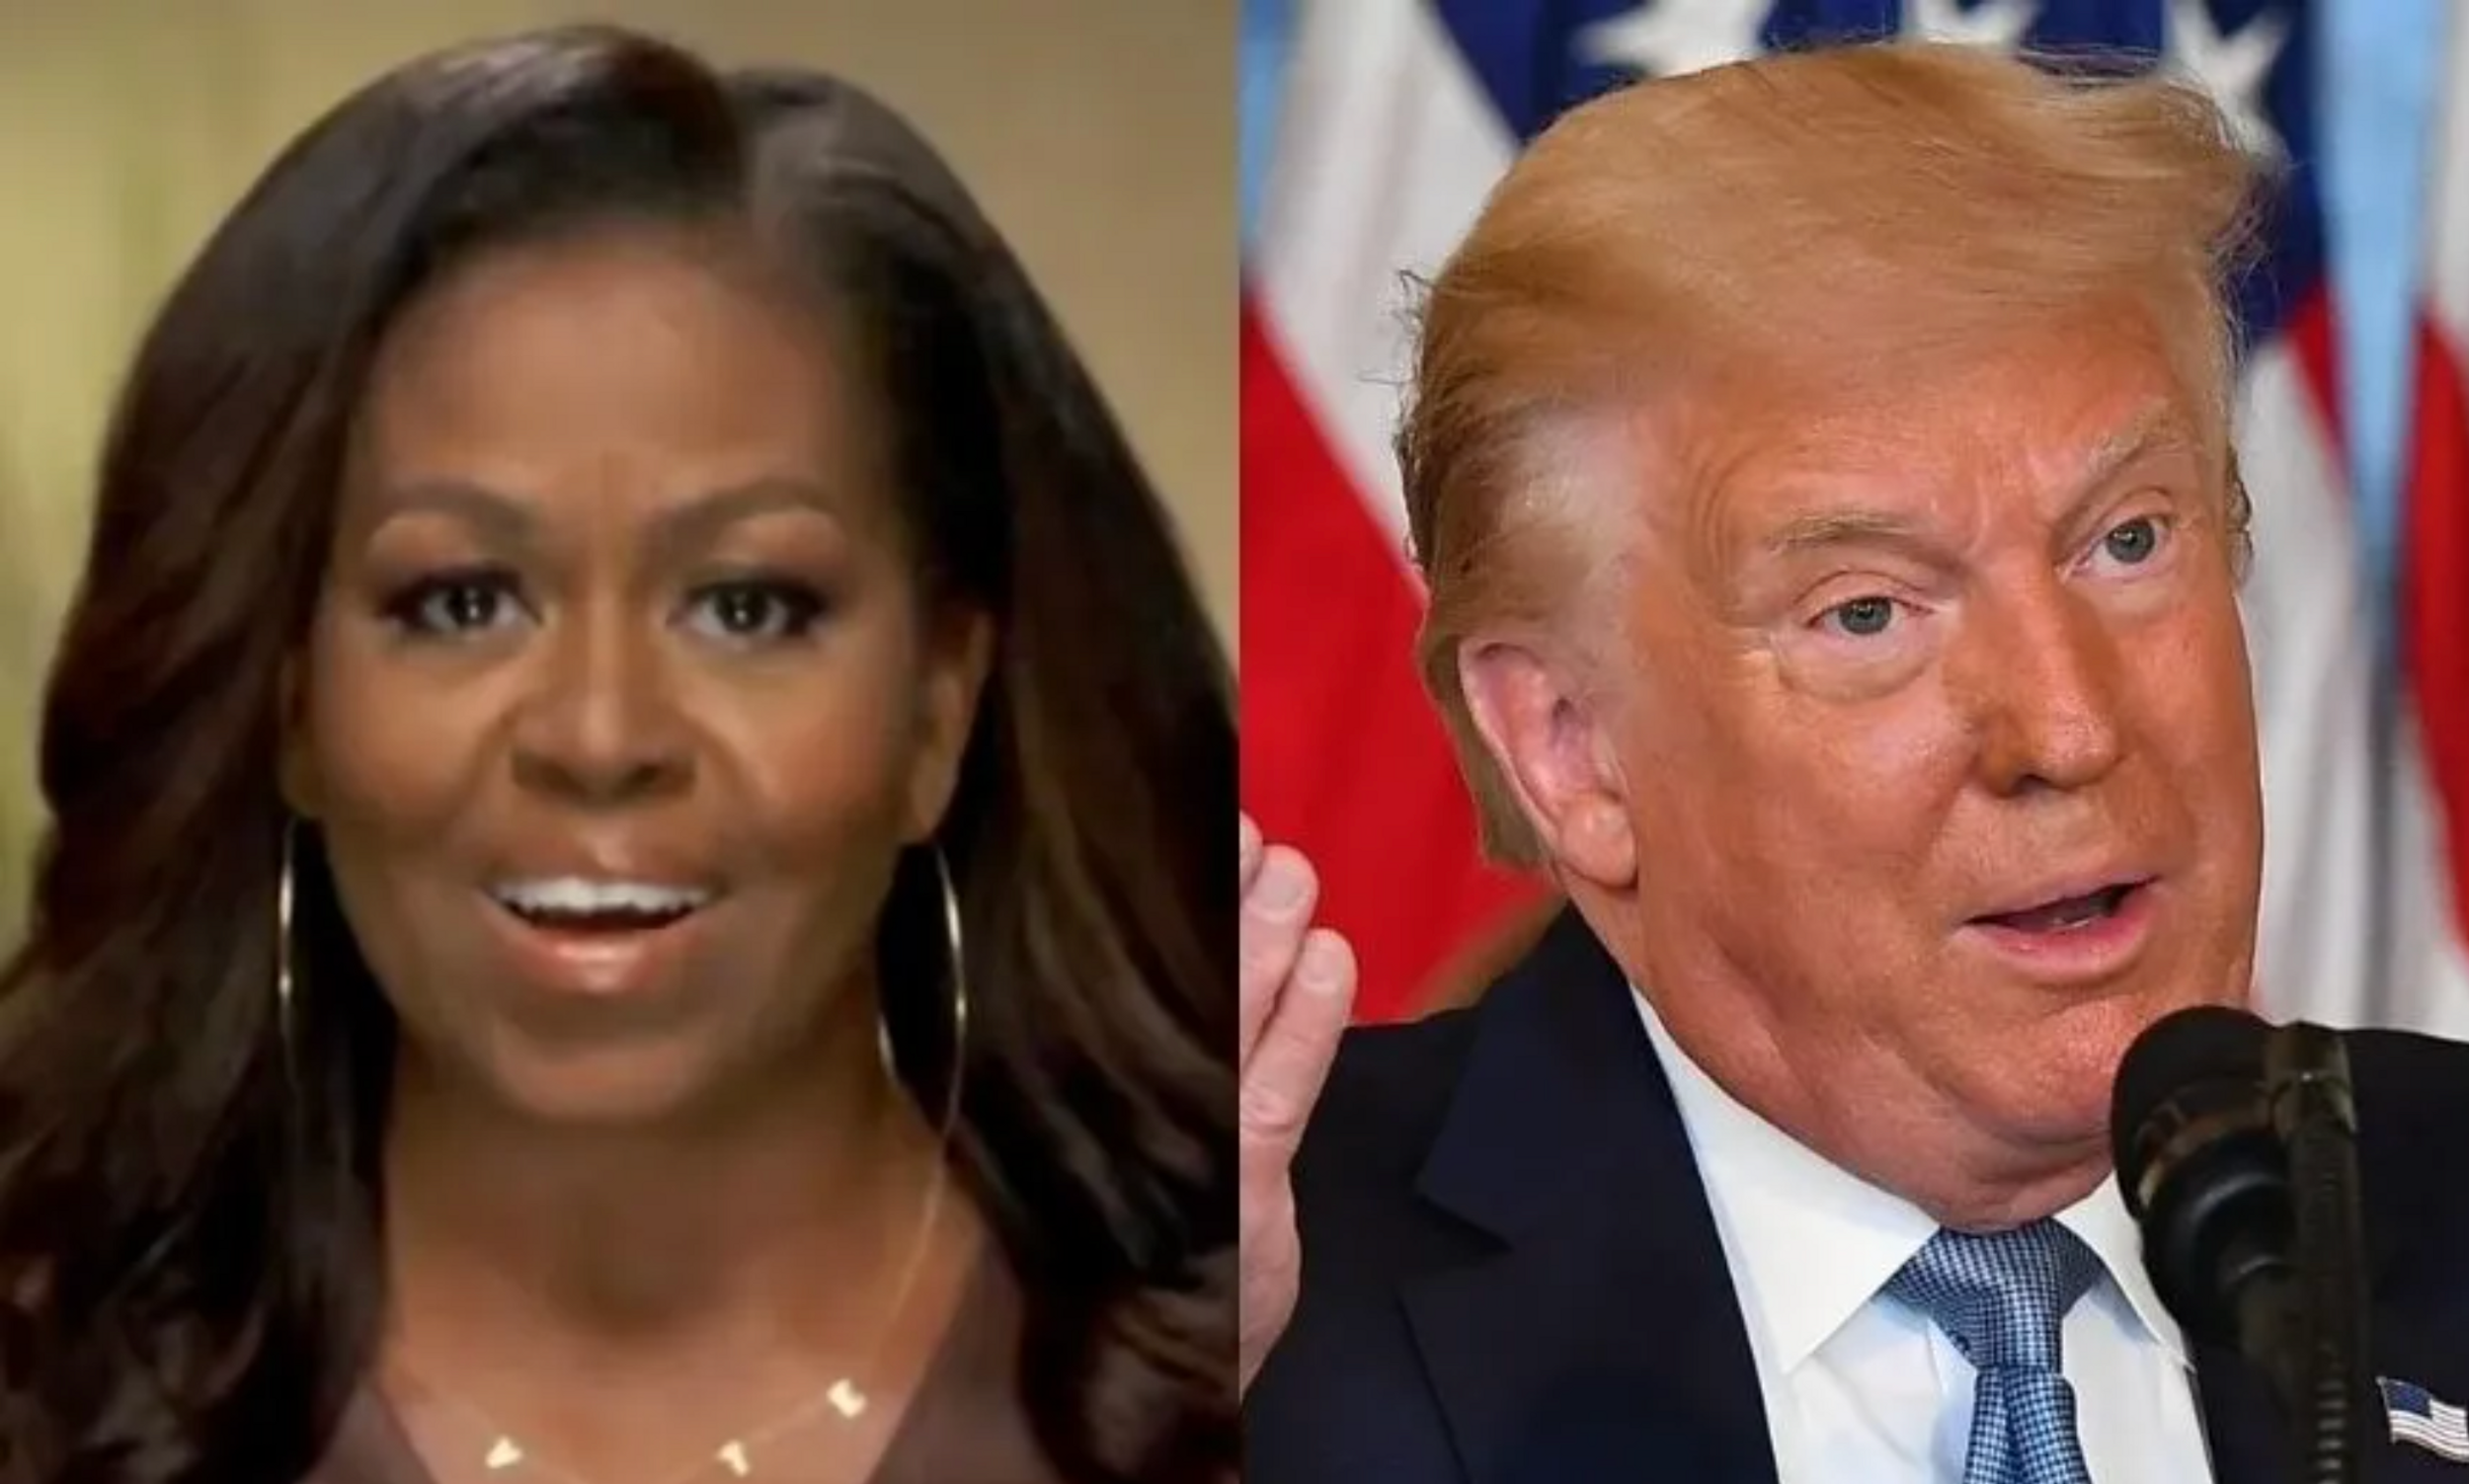 TX Parent Demands Kids Biography of Michelle Obama Be Pulled From Schools for 'Unfair' Trump Portrayal